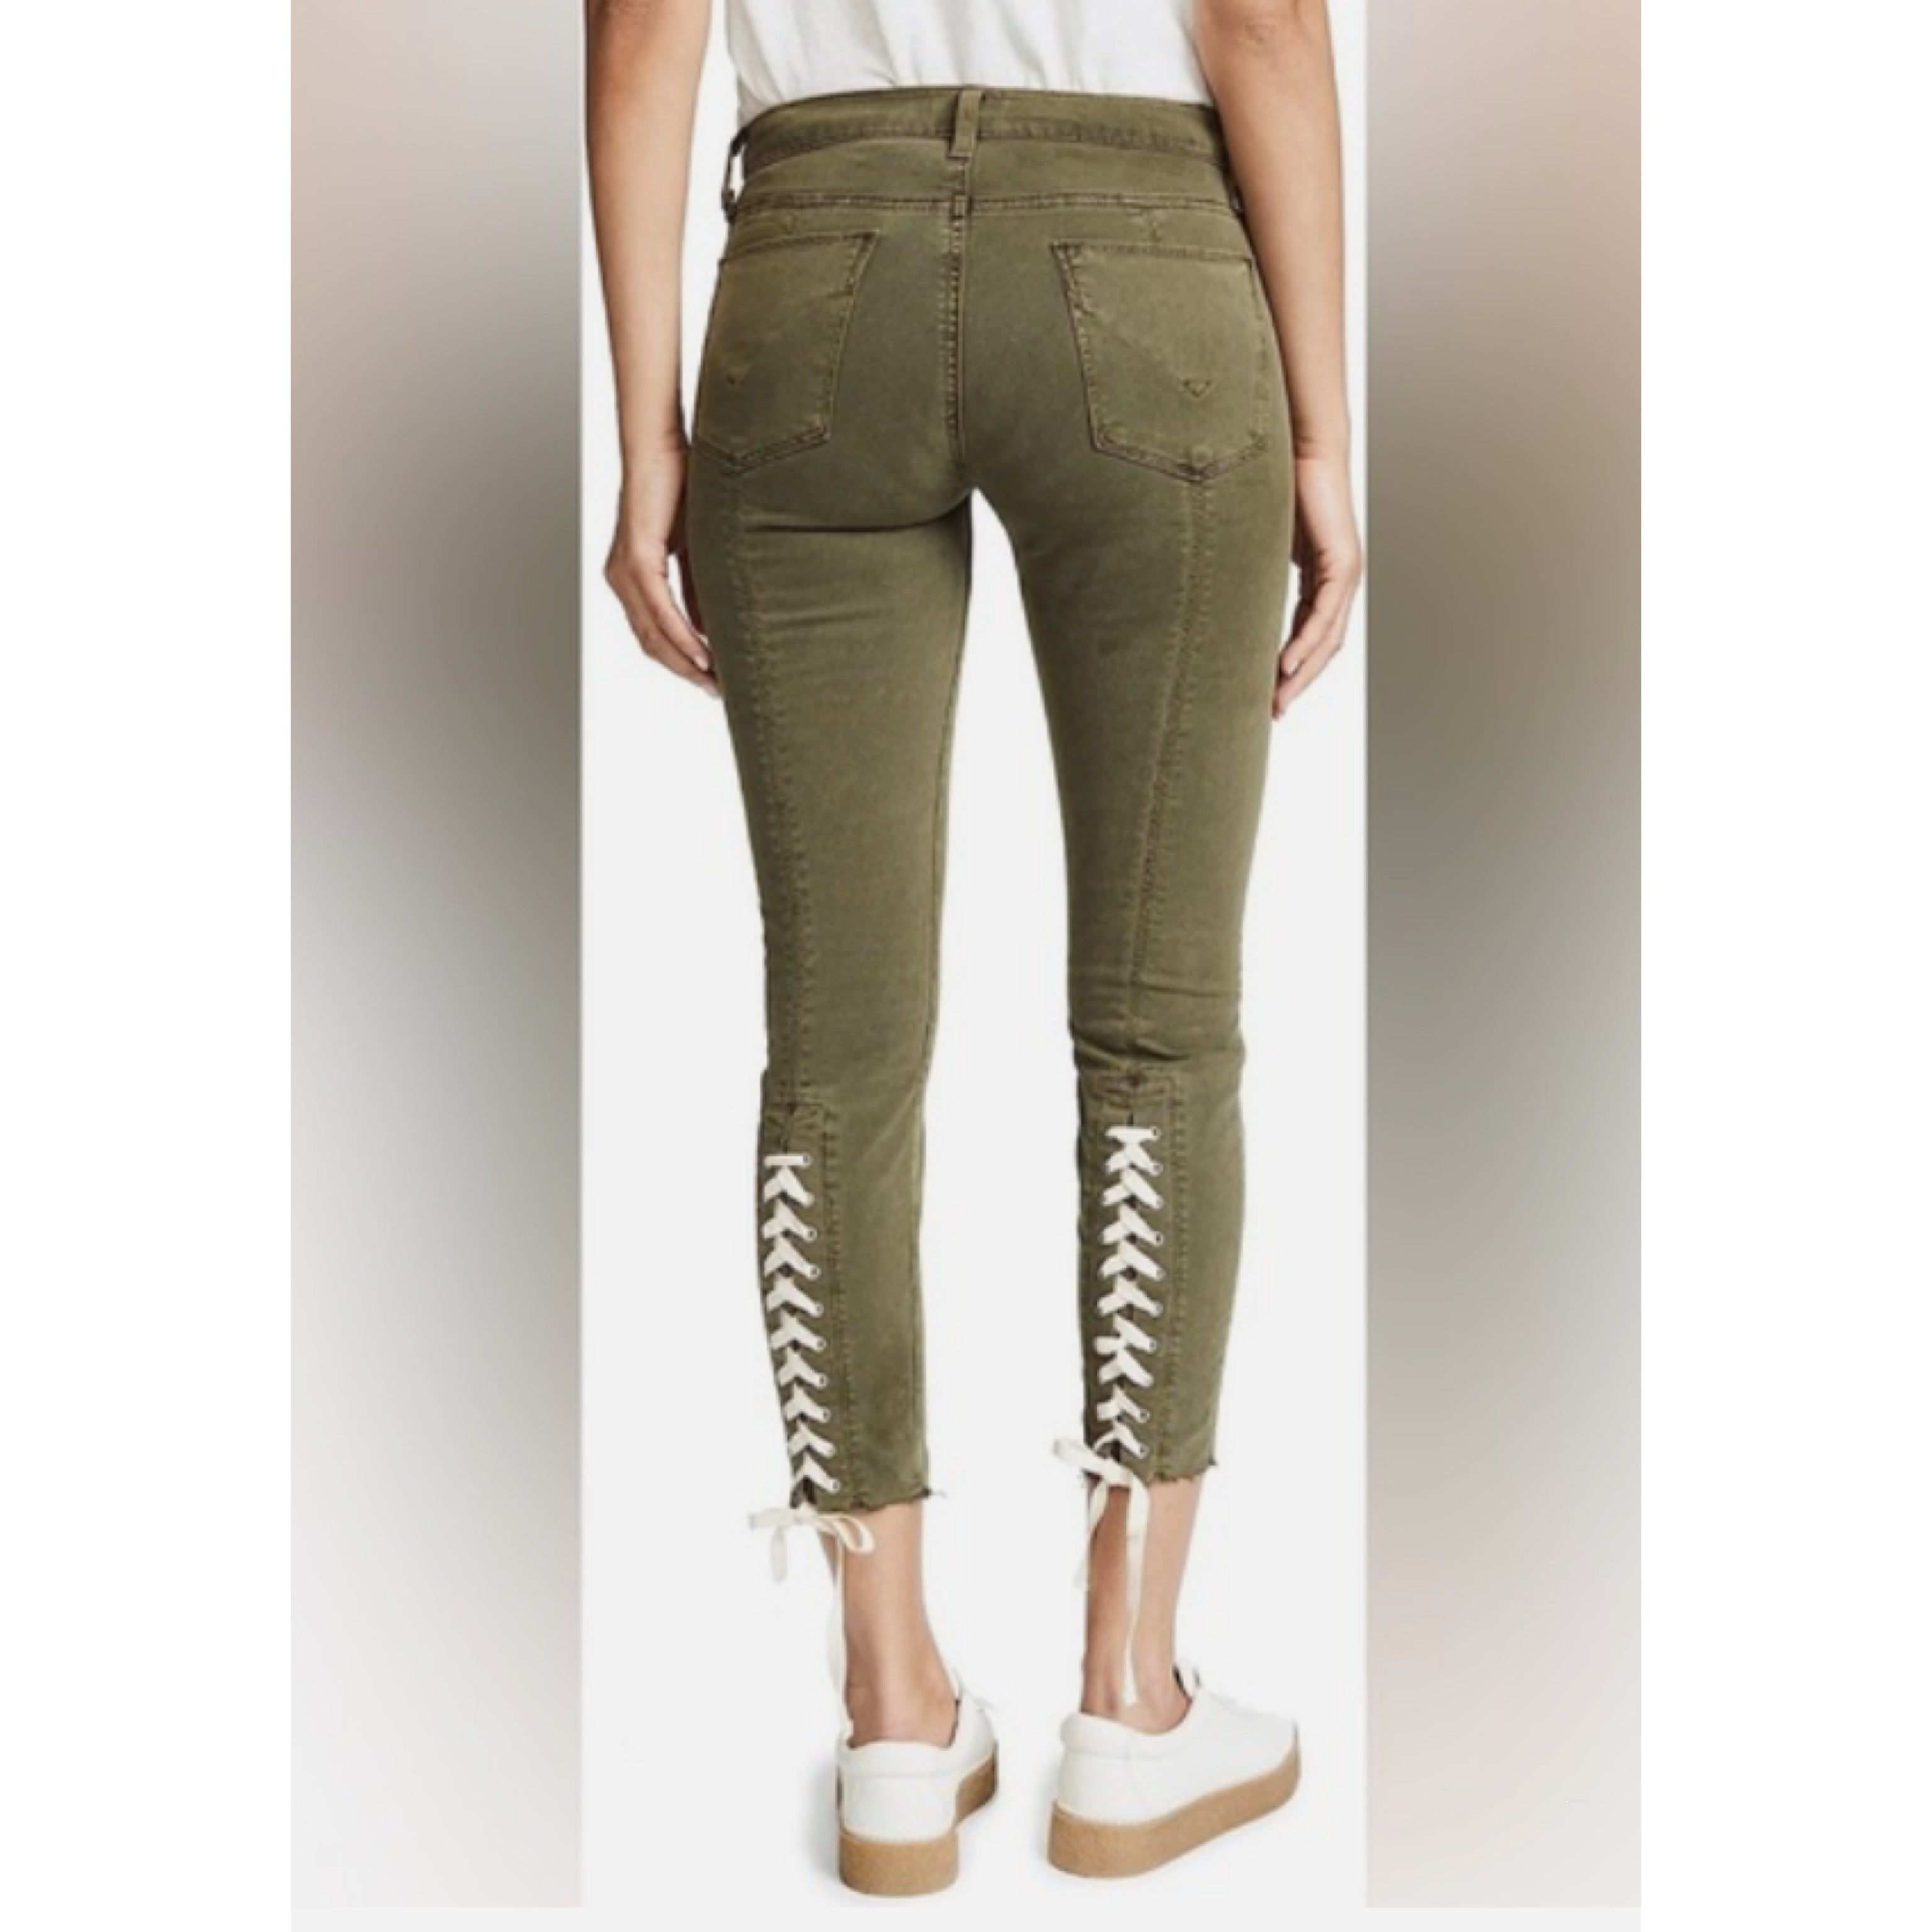 Hudson olive Nico crop lace-up jeans, size 28, NEW WITH TAGS!